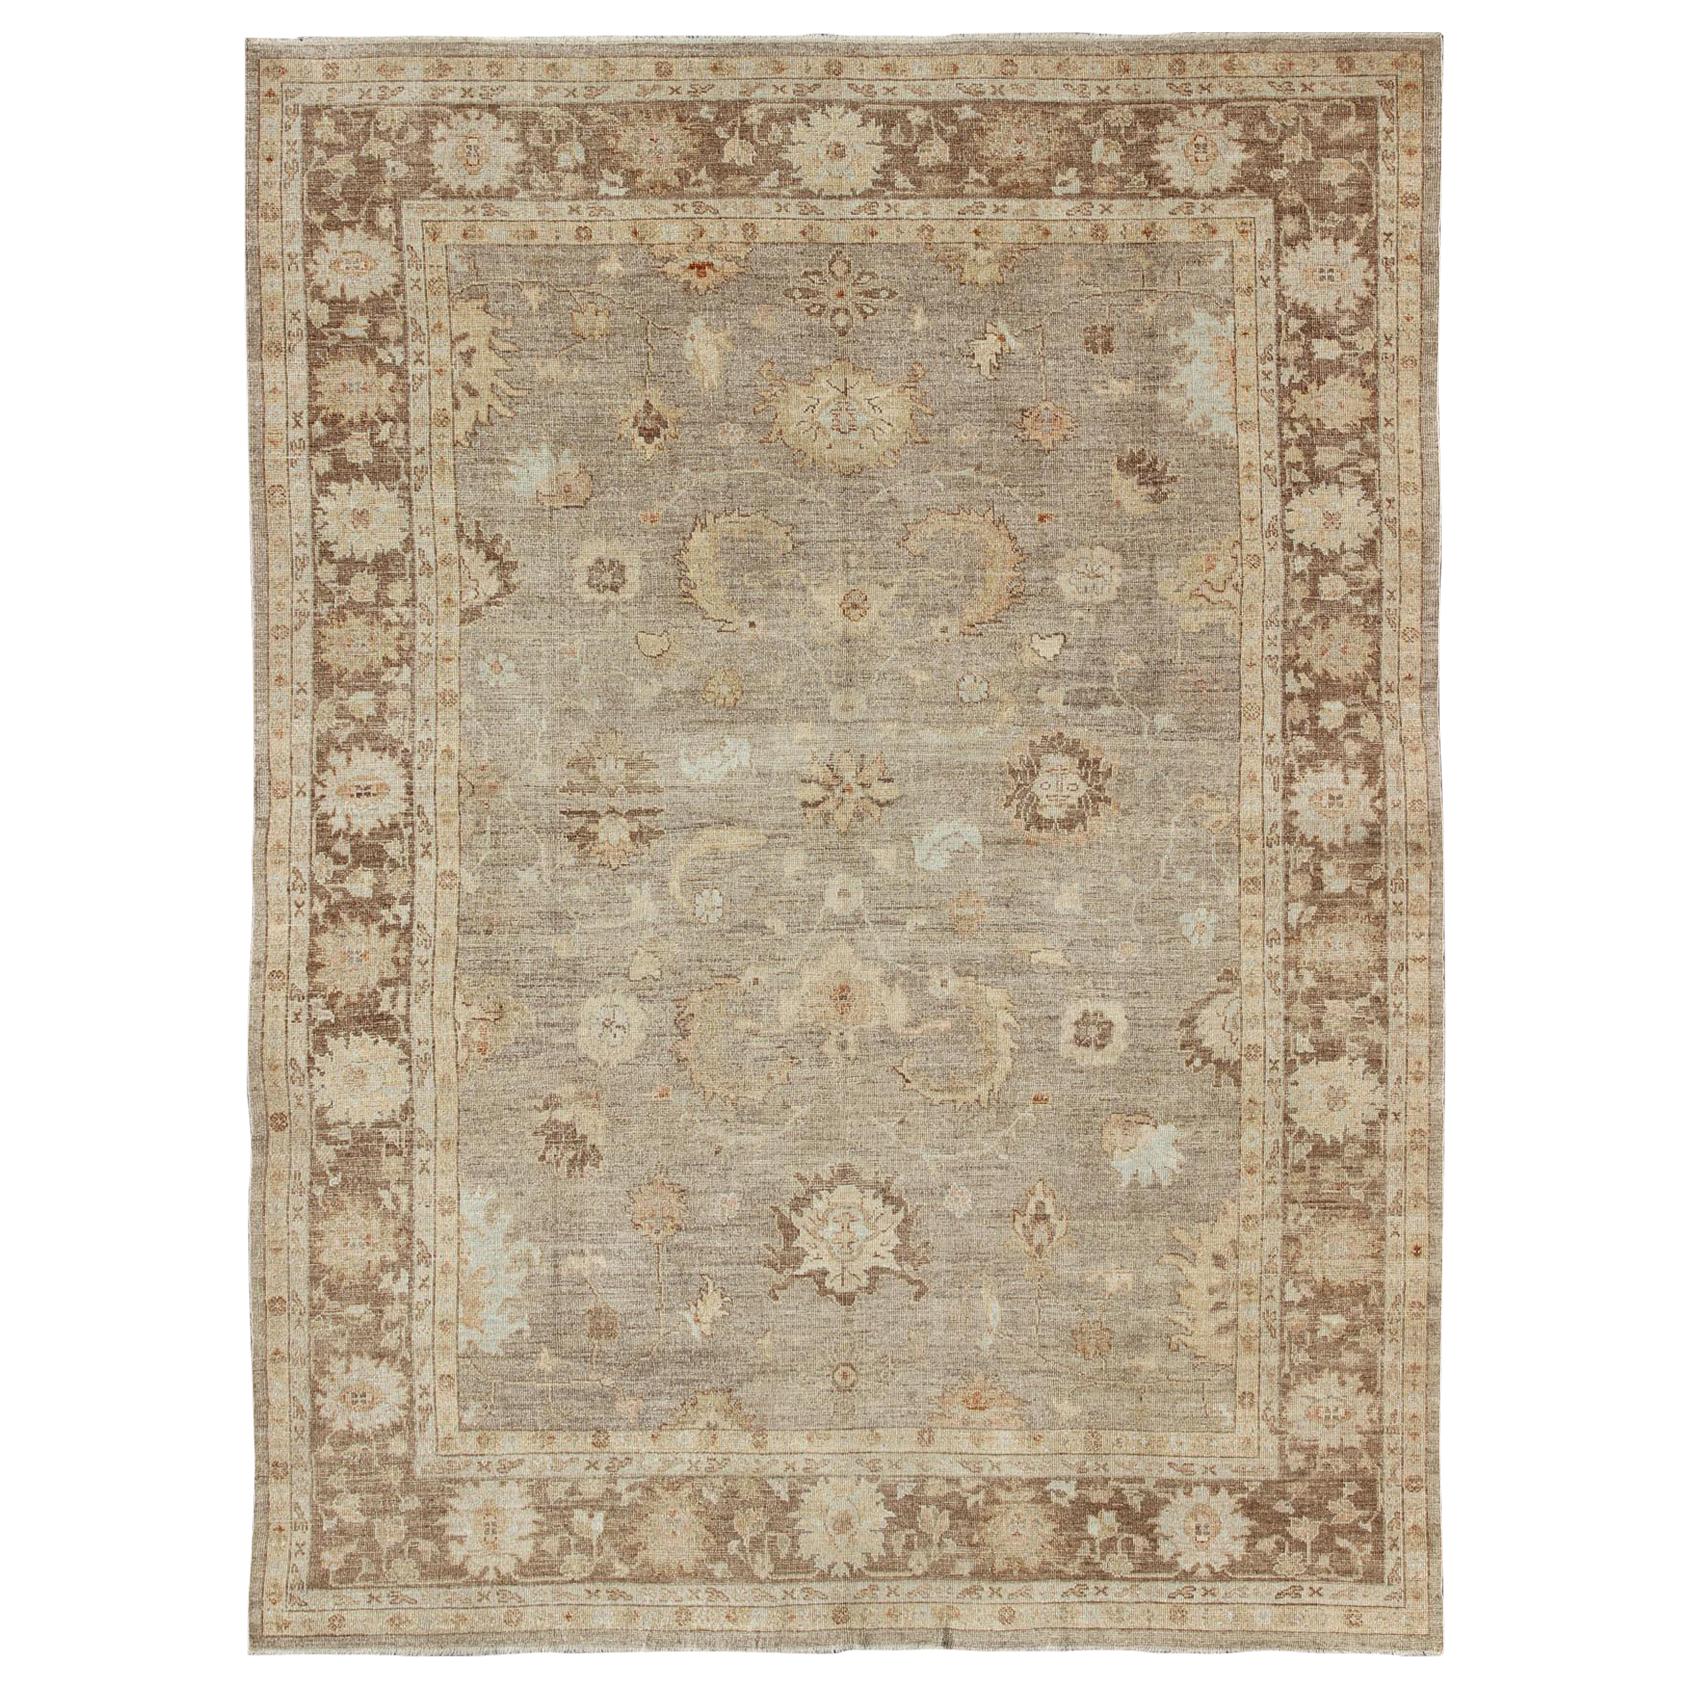 Angora Oushak Turkish Rug in Warm Colors of Taupe, Gray, Brown, Cream For Sale